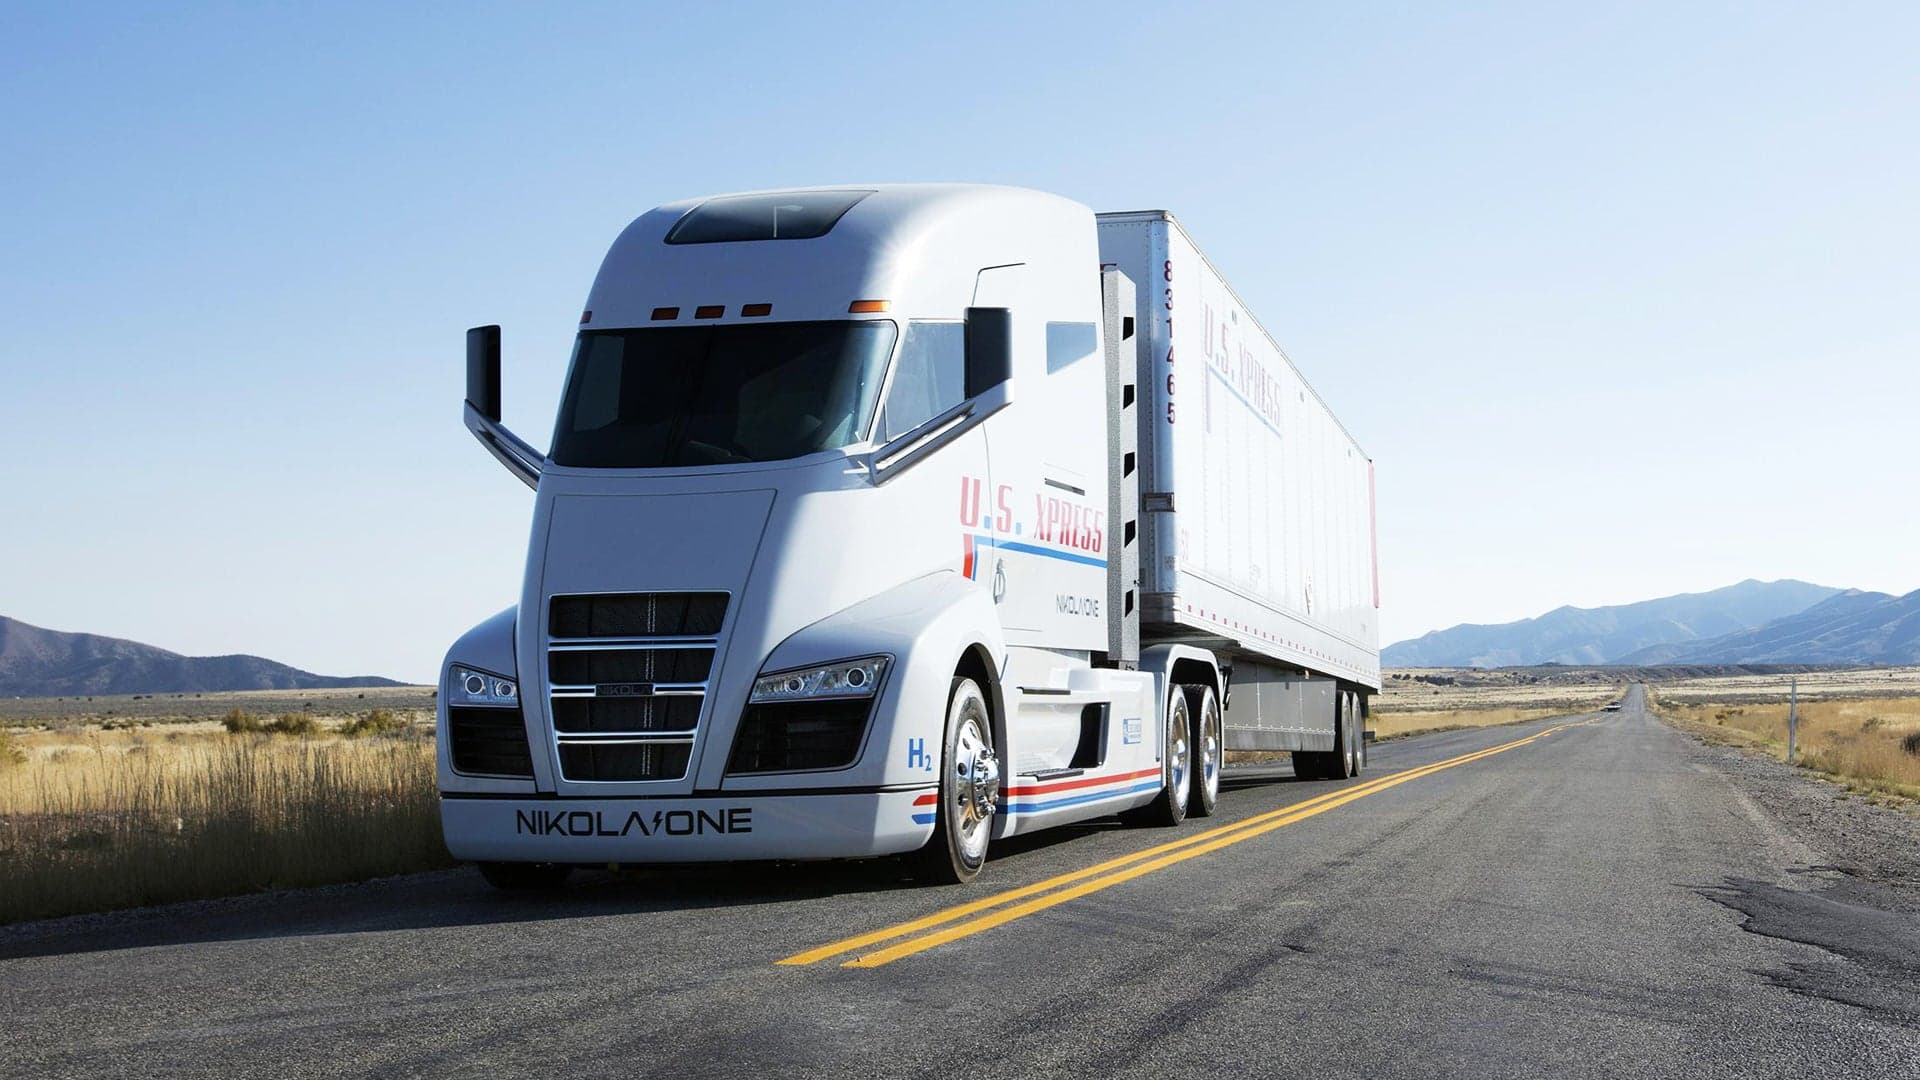 EV Truck Startup Nikola Accused of ‘Intricate Fraud’ by Financial Research Firm